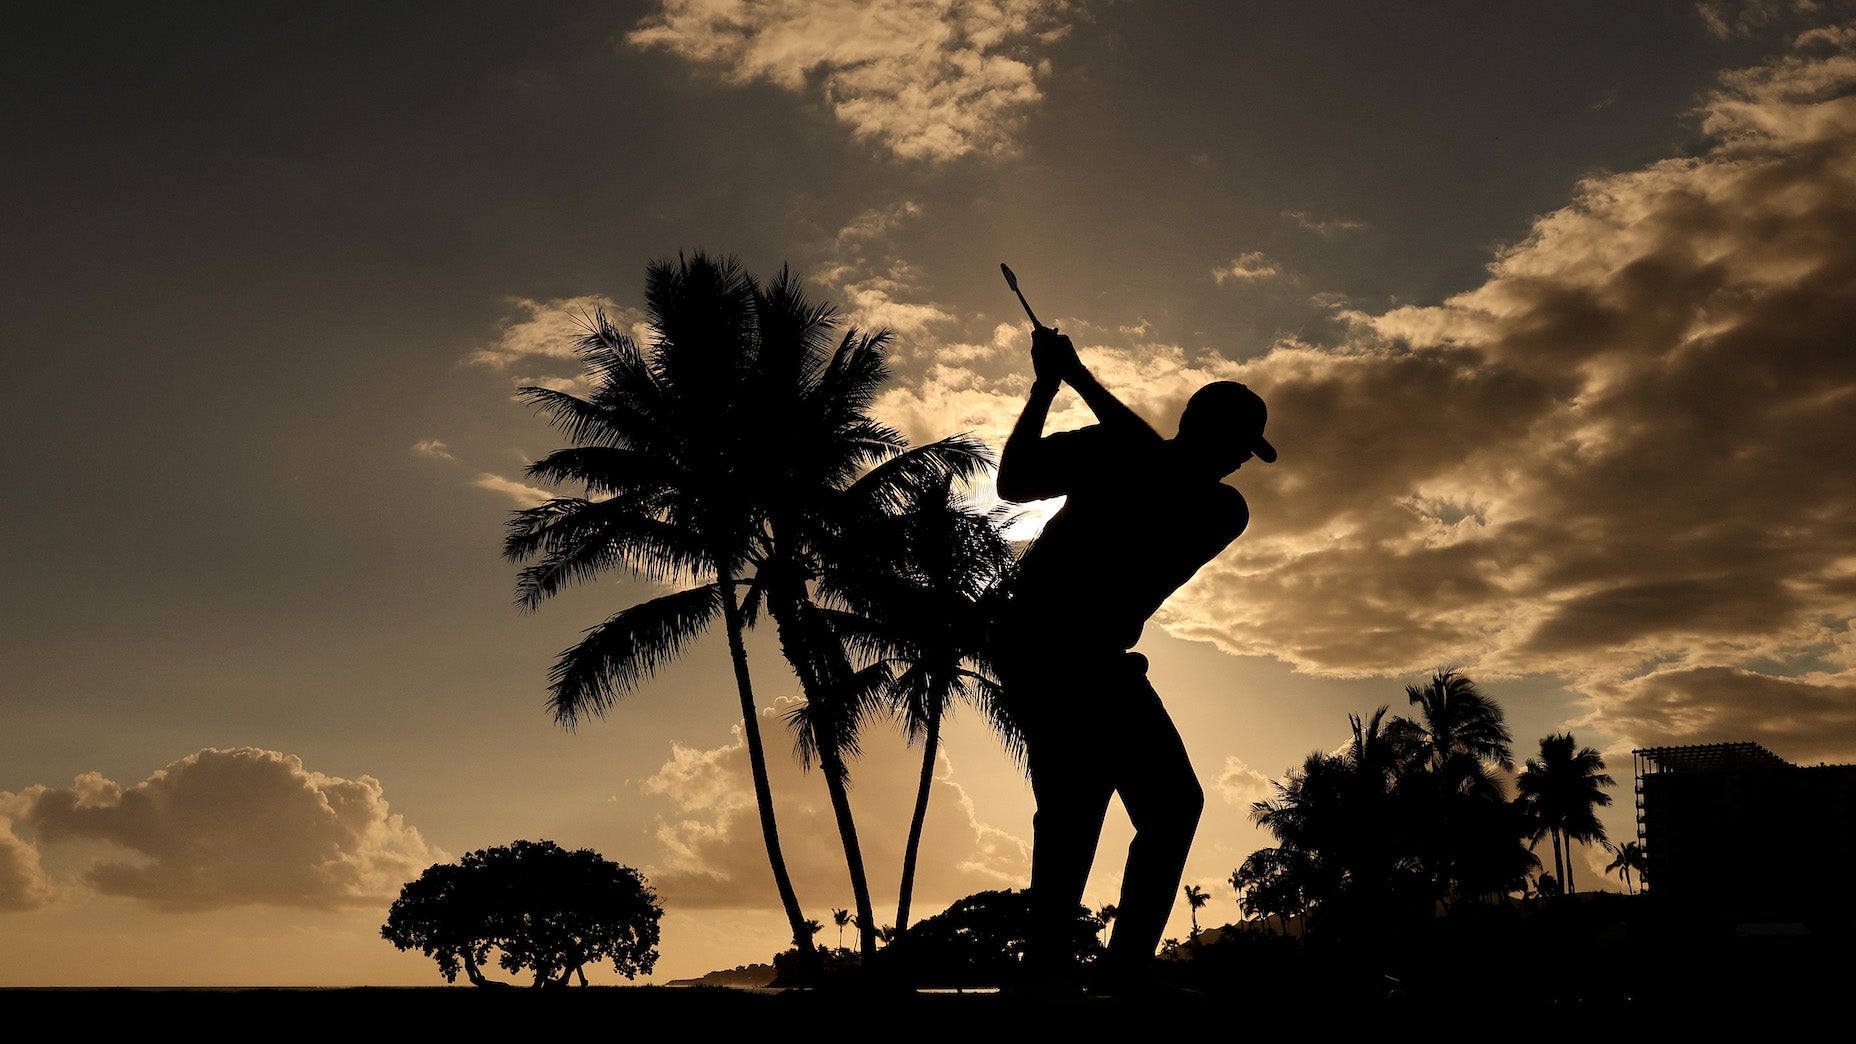 HONOLULU, HAWAII - JANUARY 14: Adam Schenk of the United States plays his shot from the 17th tee during the second round of the Sony Open in Hawaii at Waialae Country Club on January 14, 2022 in Honolulu, Hawaii. (Photo by Gregory Shamus/Getty Images)